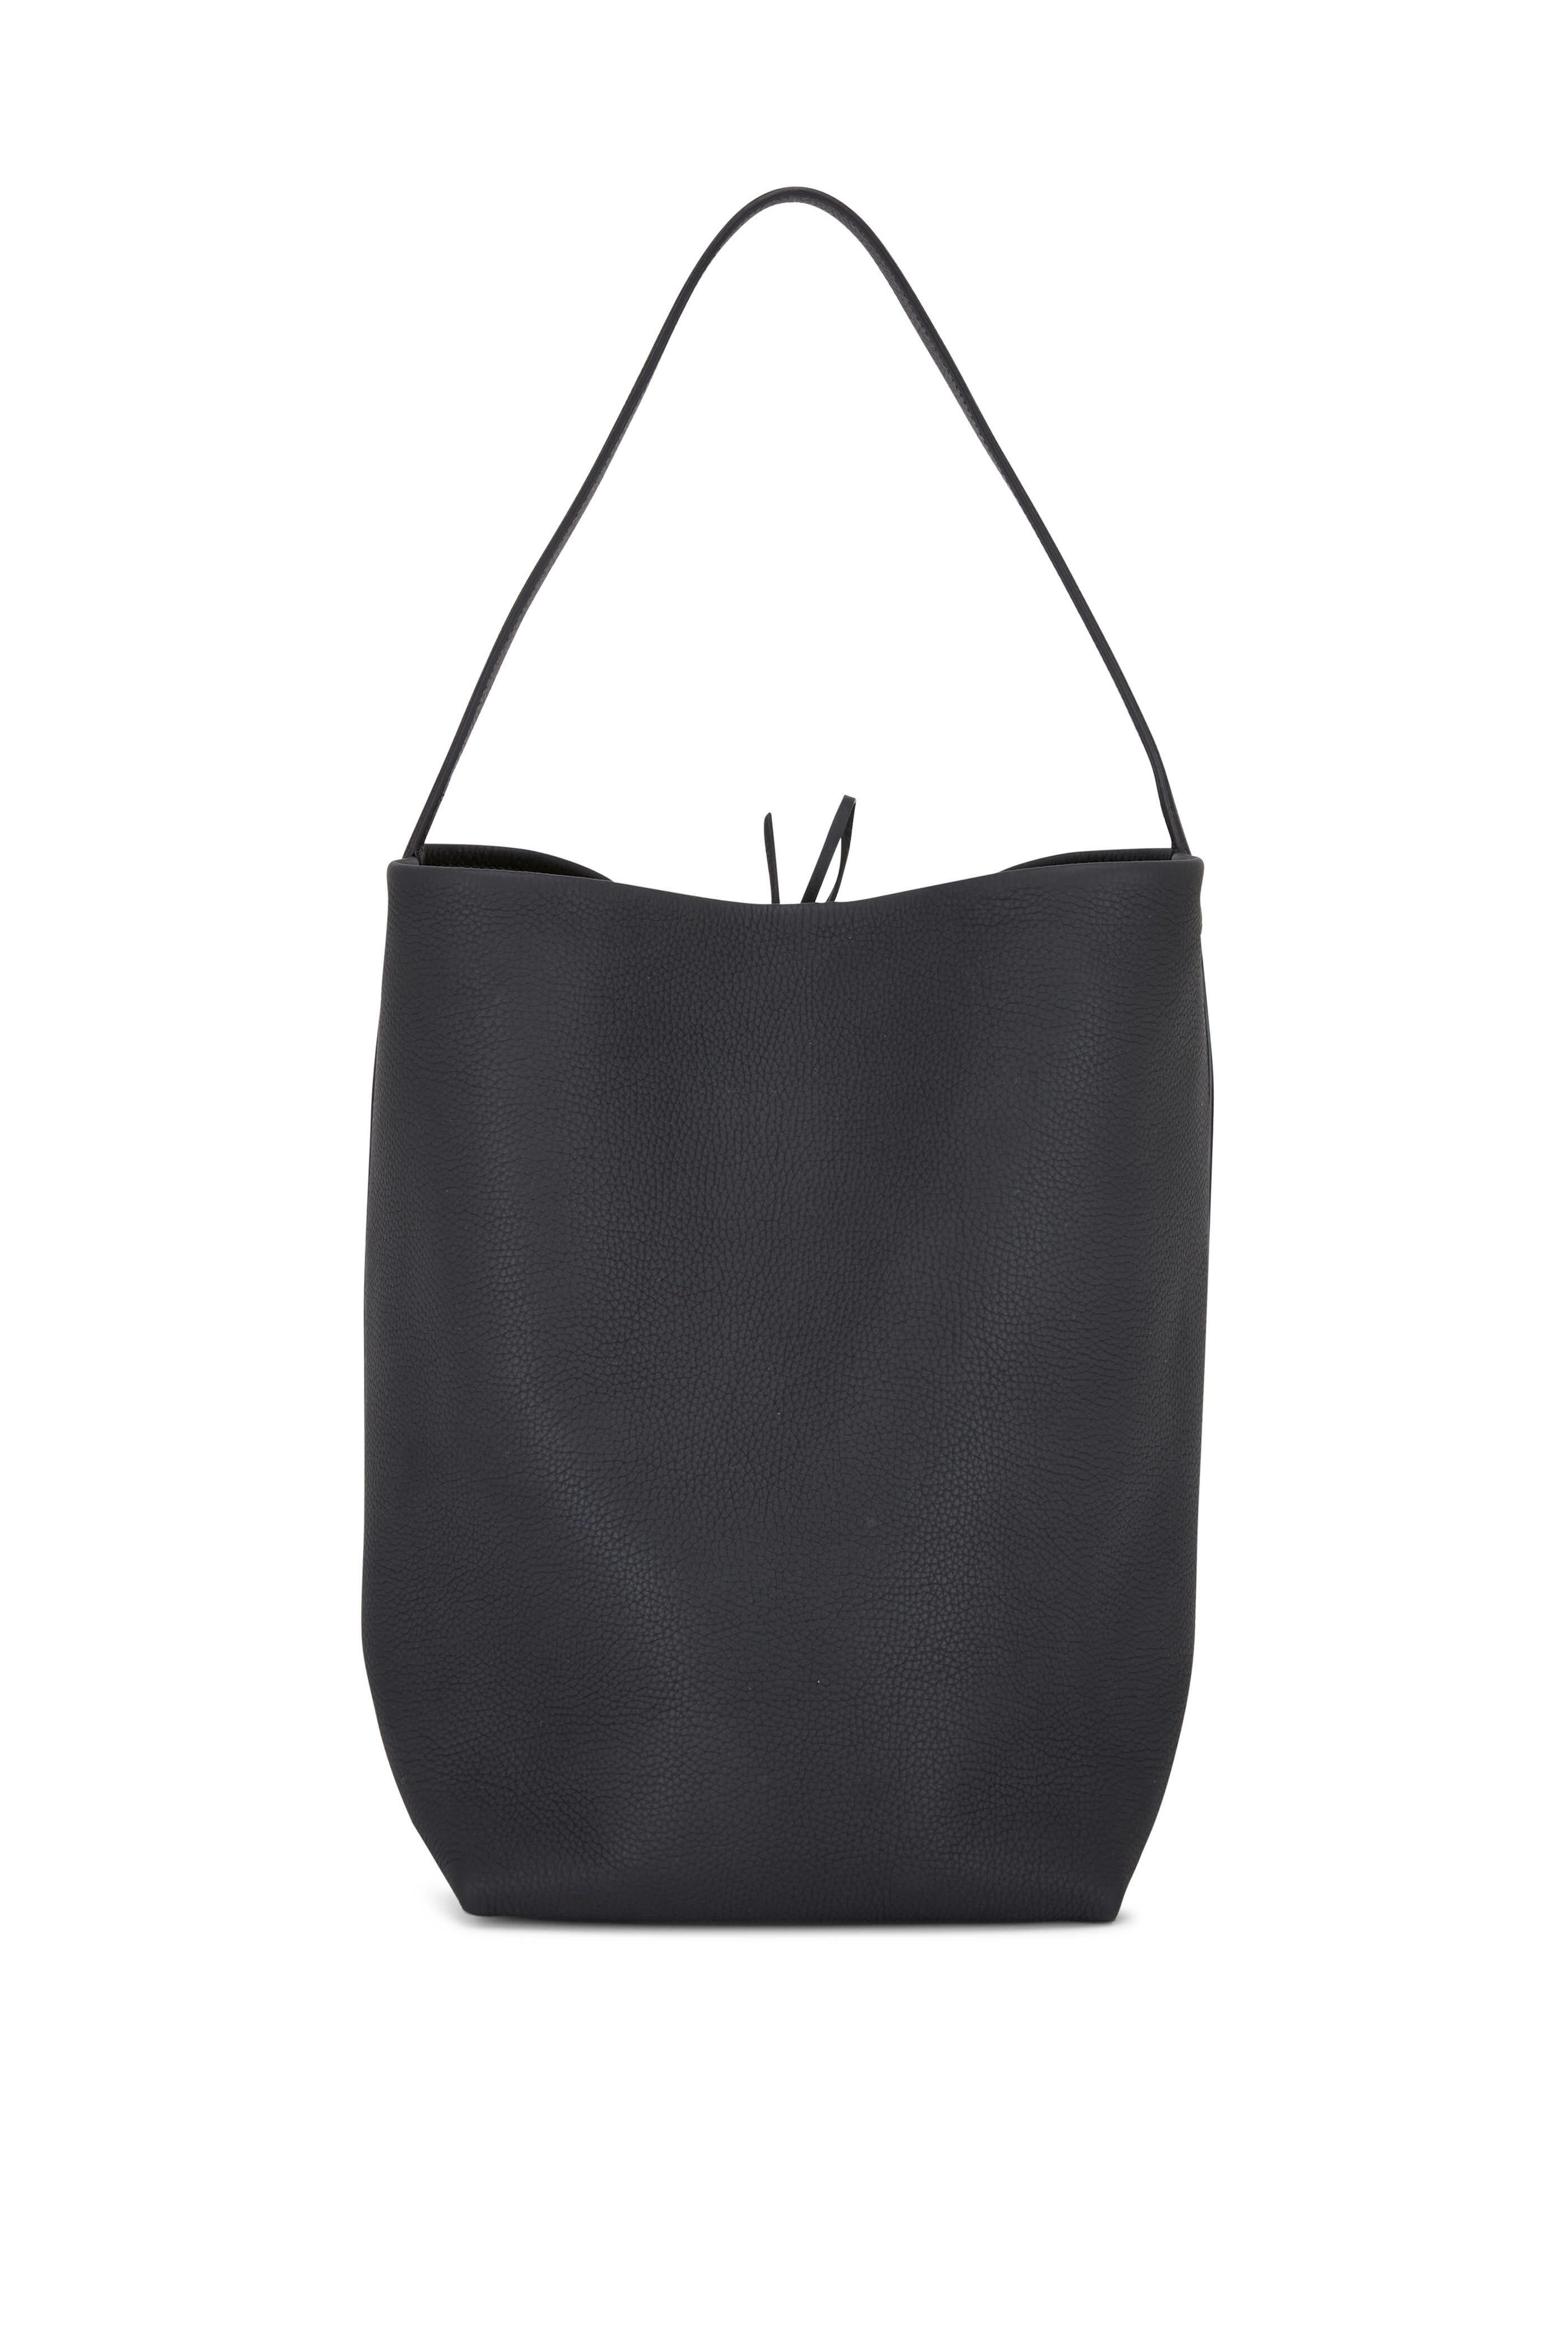 The Row - N/S Park Black Grained Leather Tote | Mitchell Stores